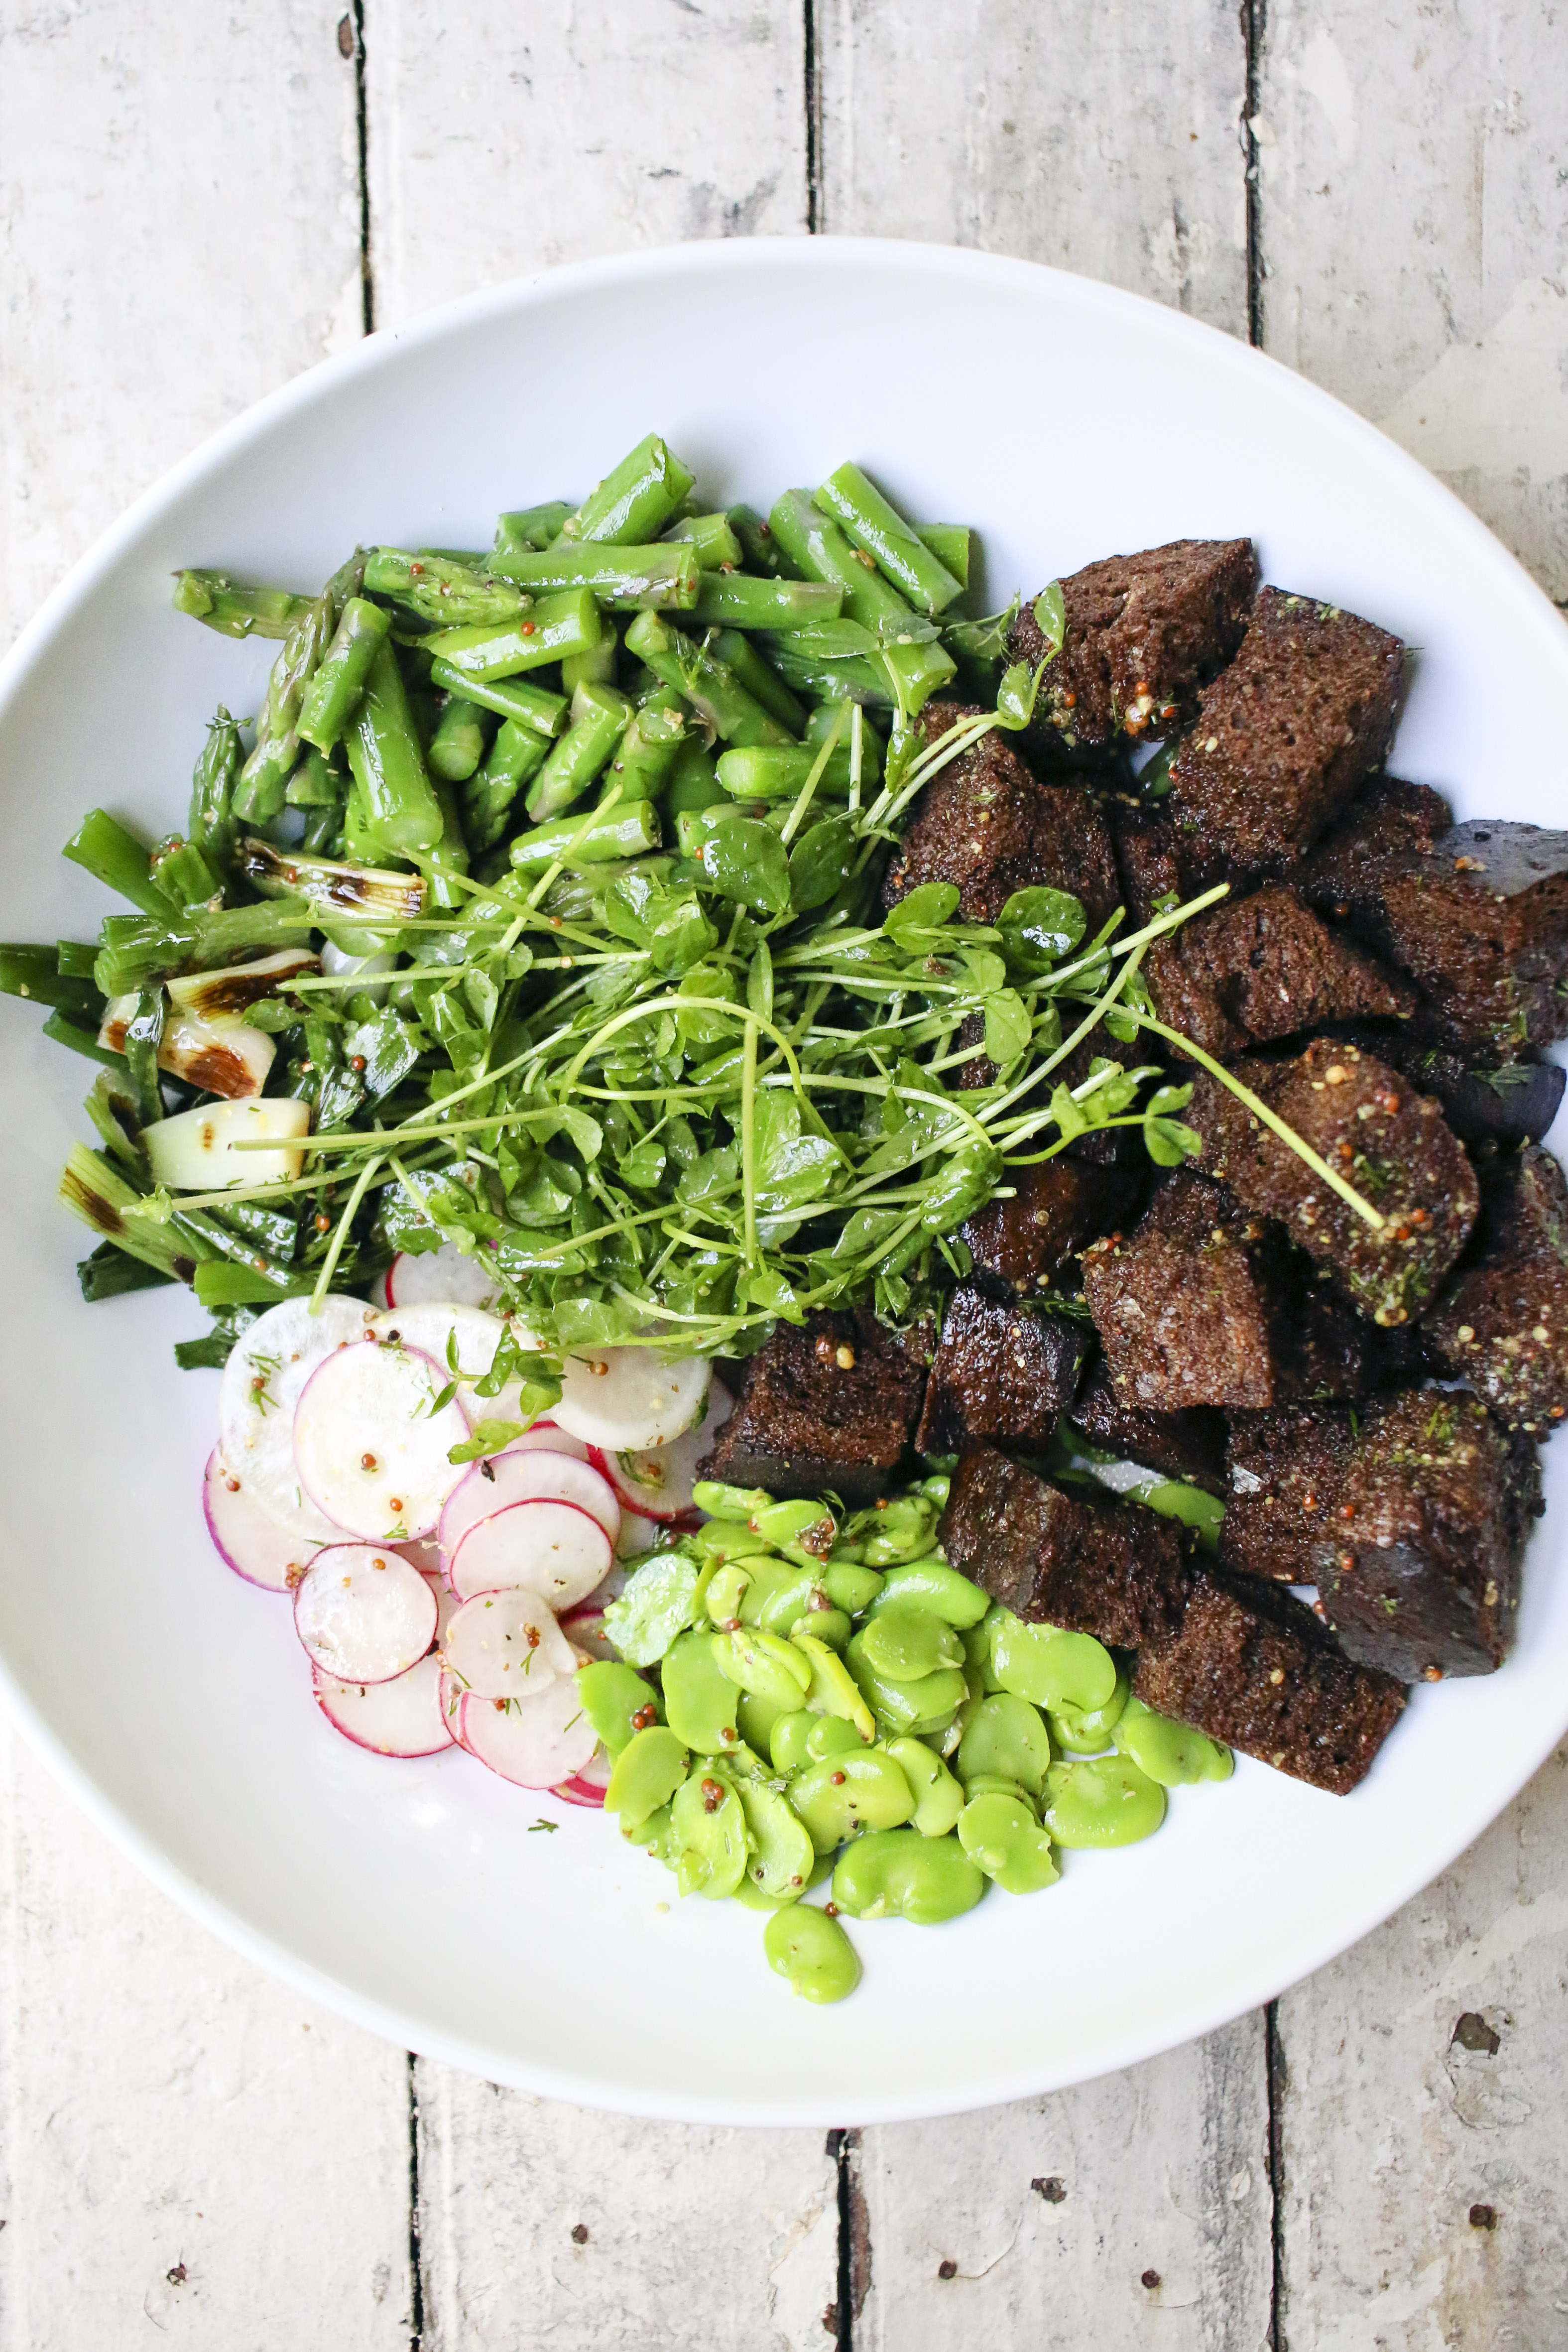 Spring Panzanella Salad with Fava Beans, Asparagus, Grilled Scallions, Radishes, Pea Shoots and Pumpernickel Croutons tossed with a Dill Vinaigrette | I Will Not Eat Oysters  